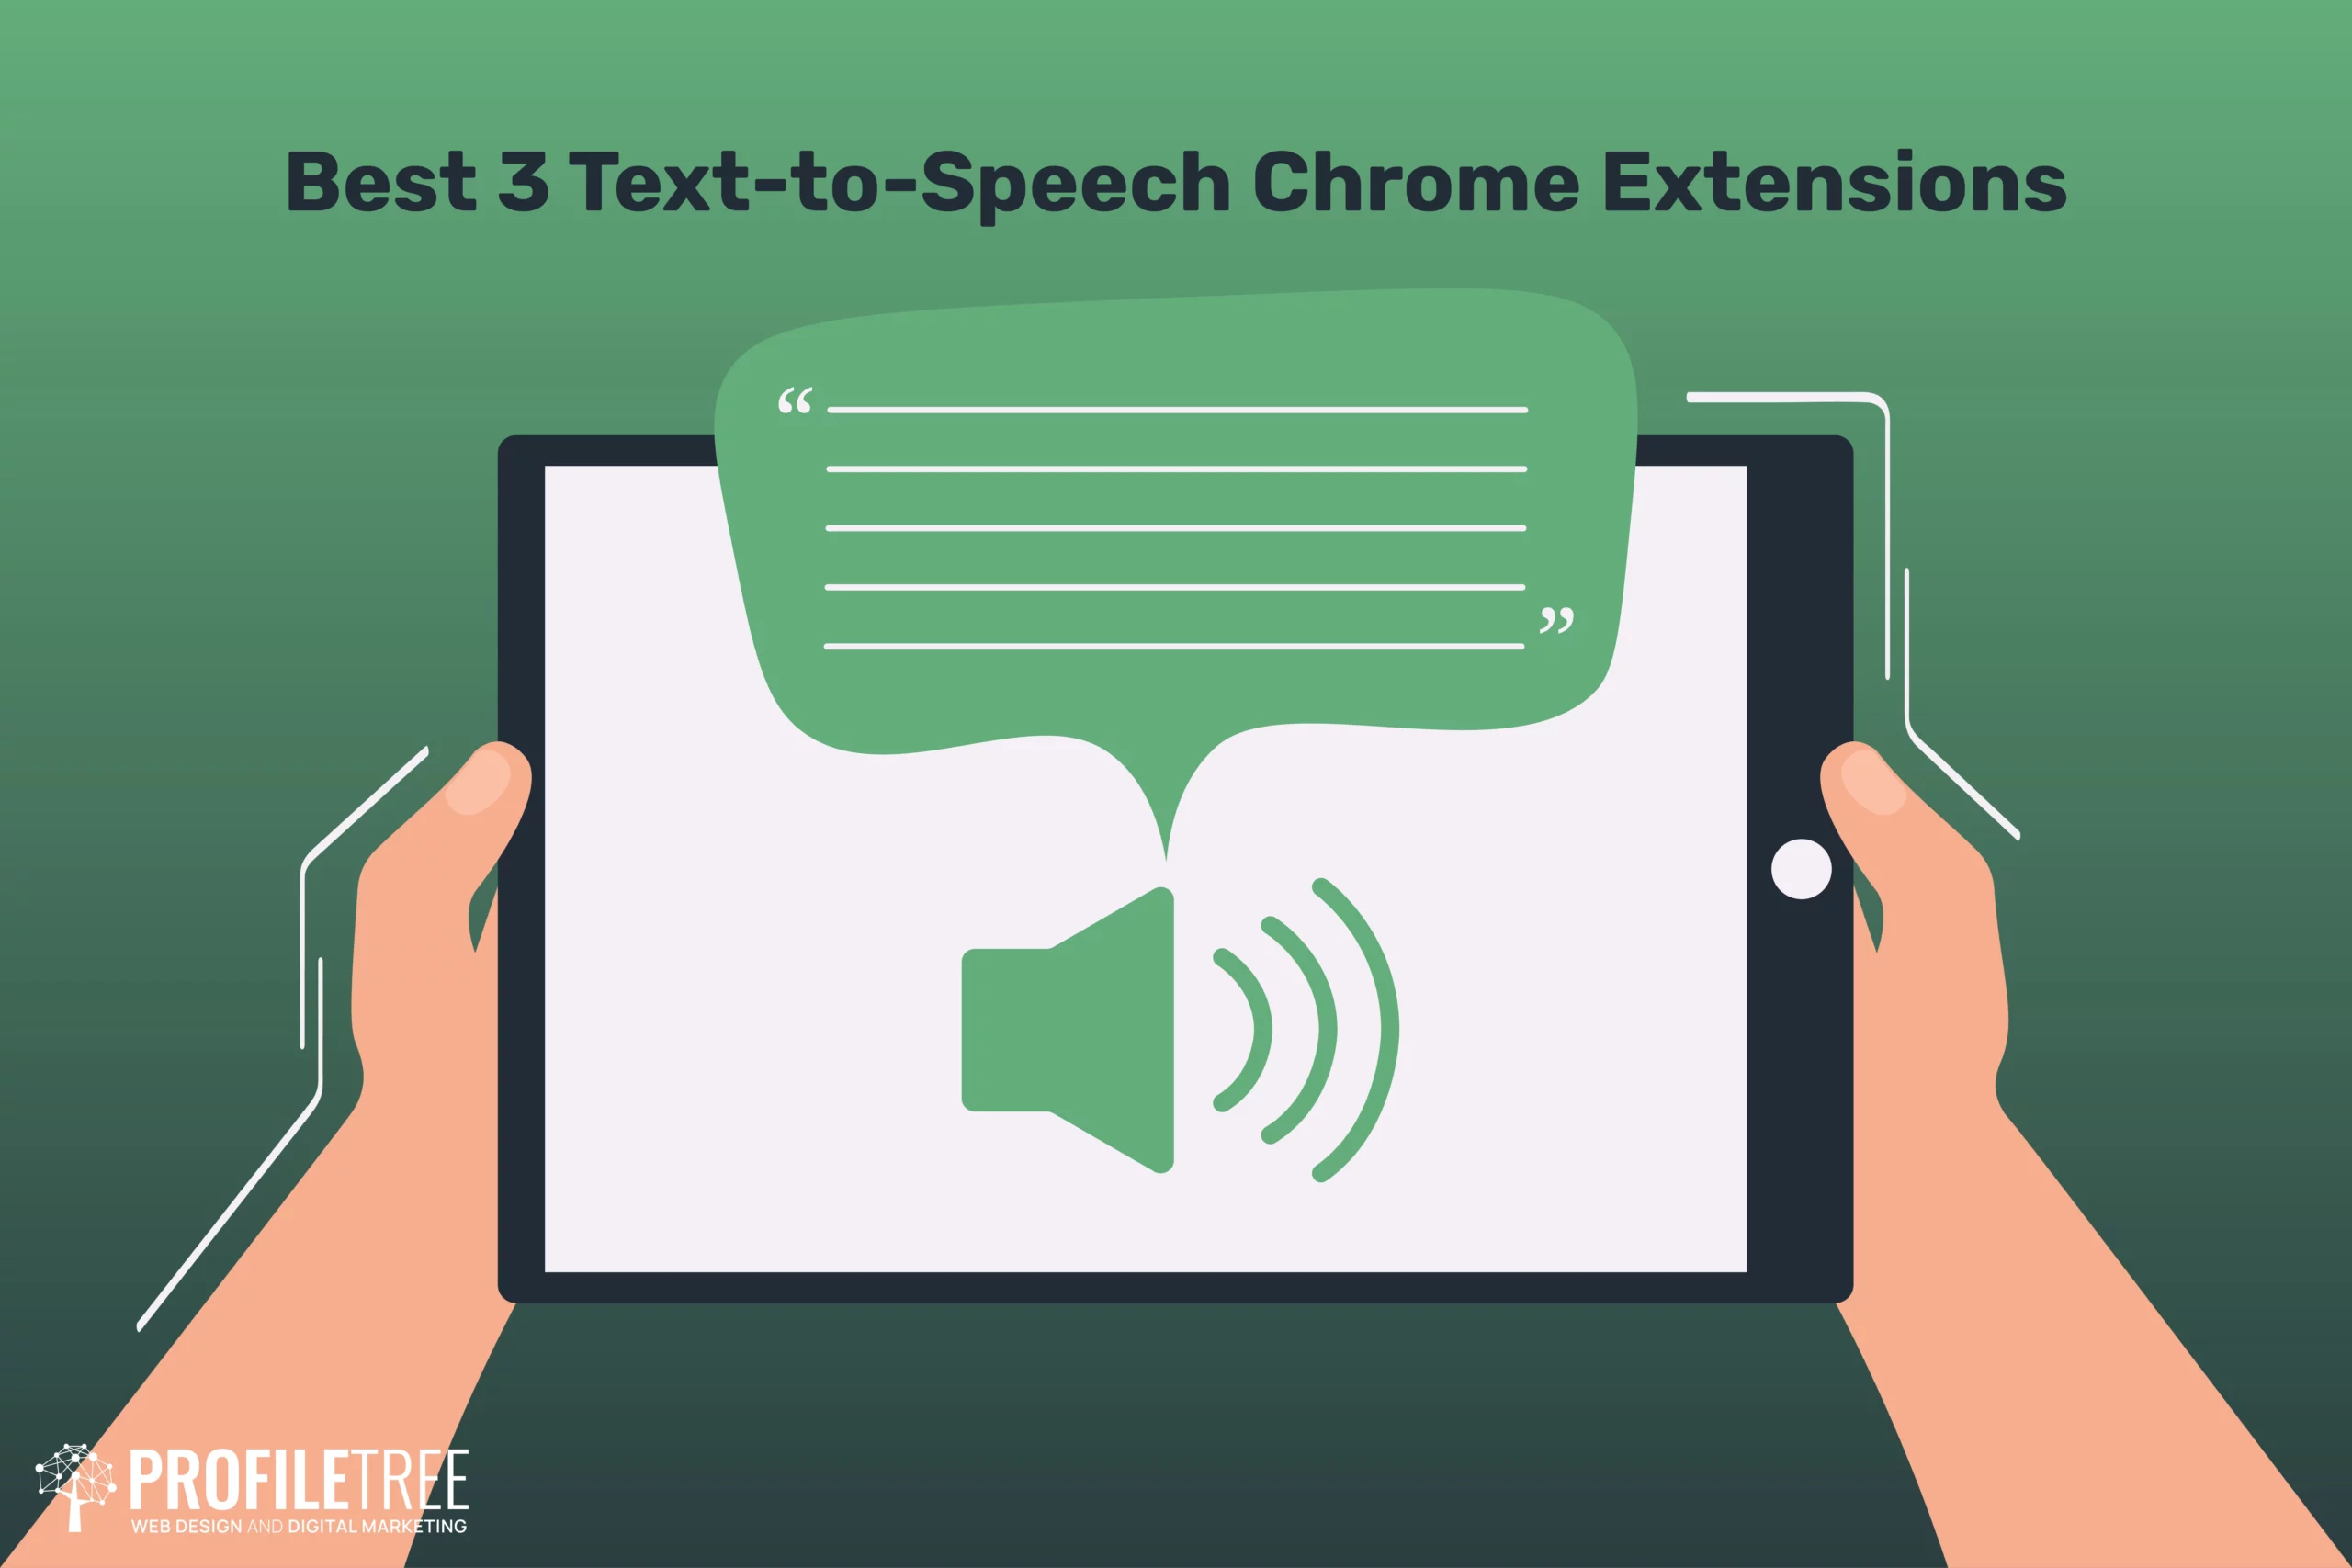 Text-to-Speech Chrome Extensions